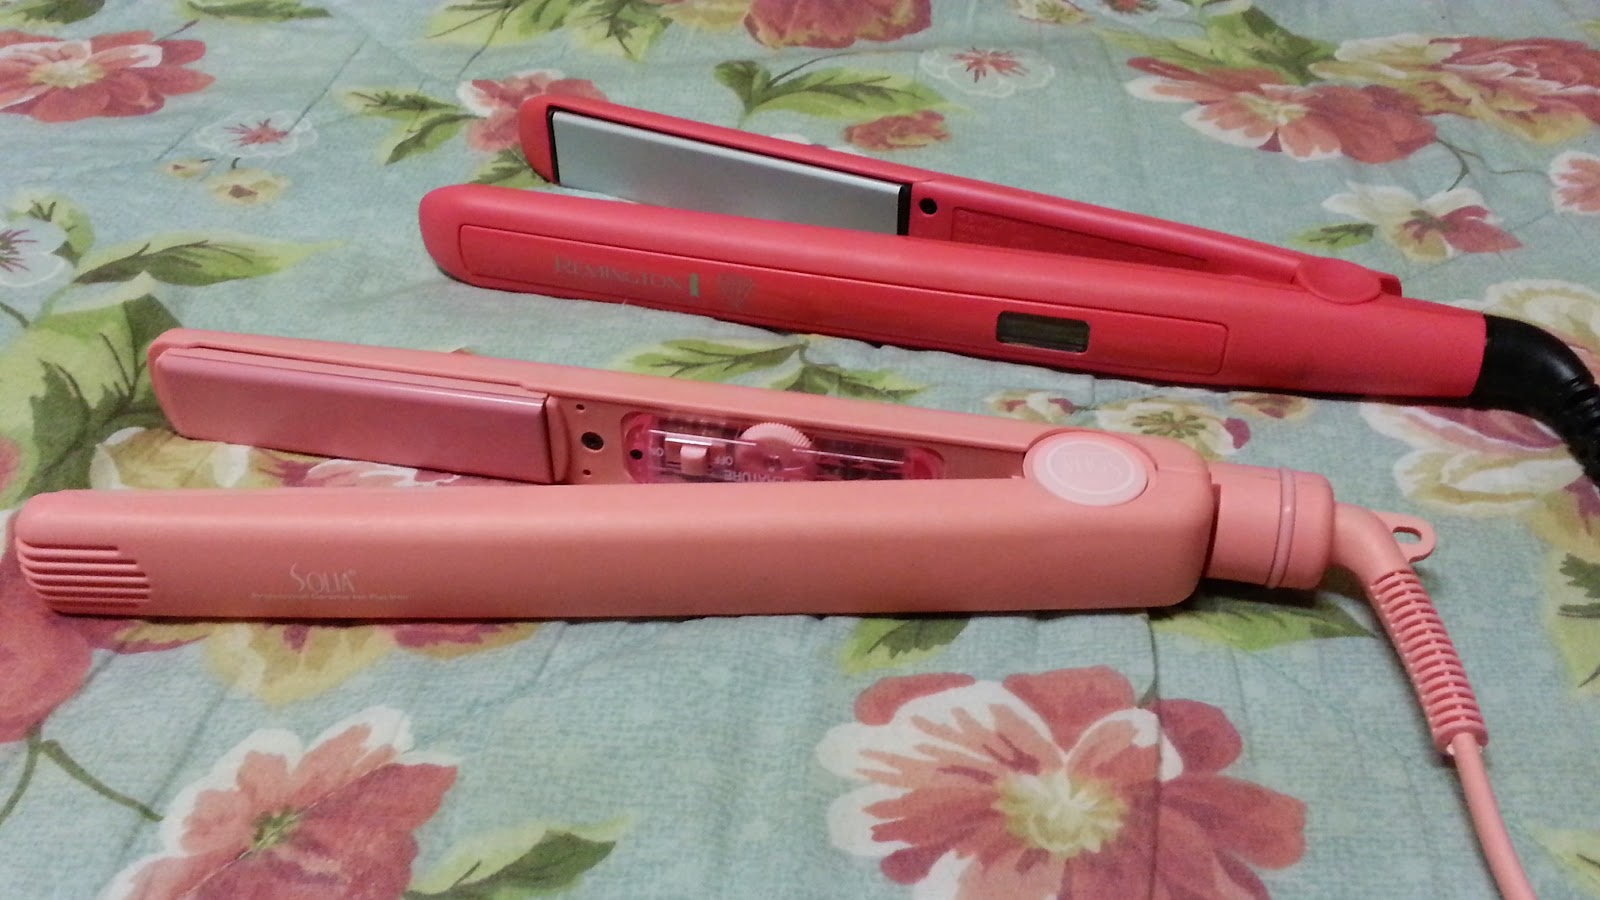 New Pink Solia and Remington Flat Irons!